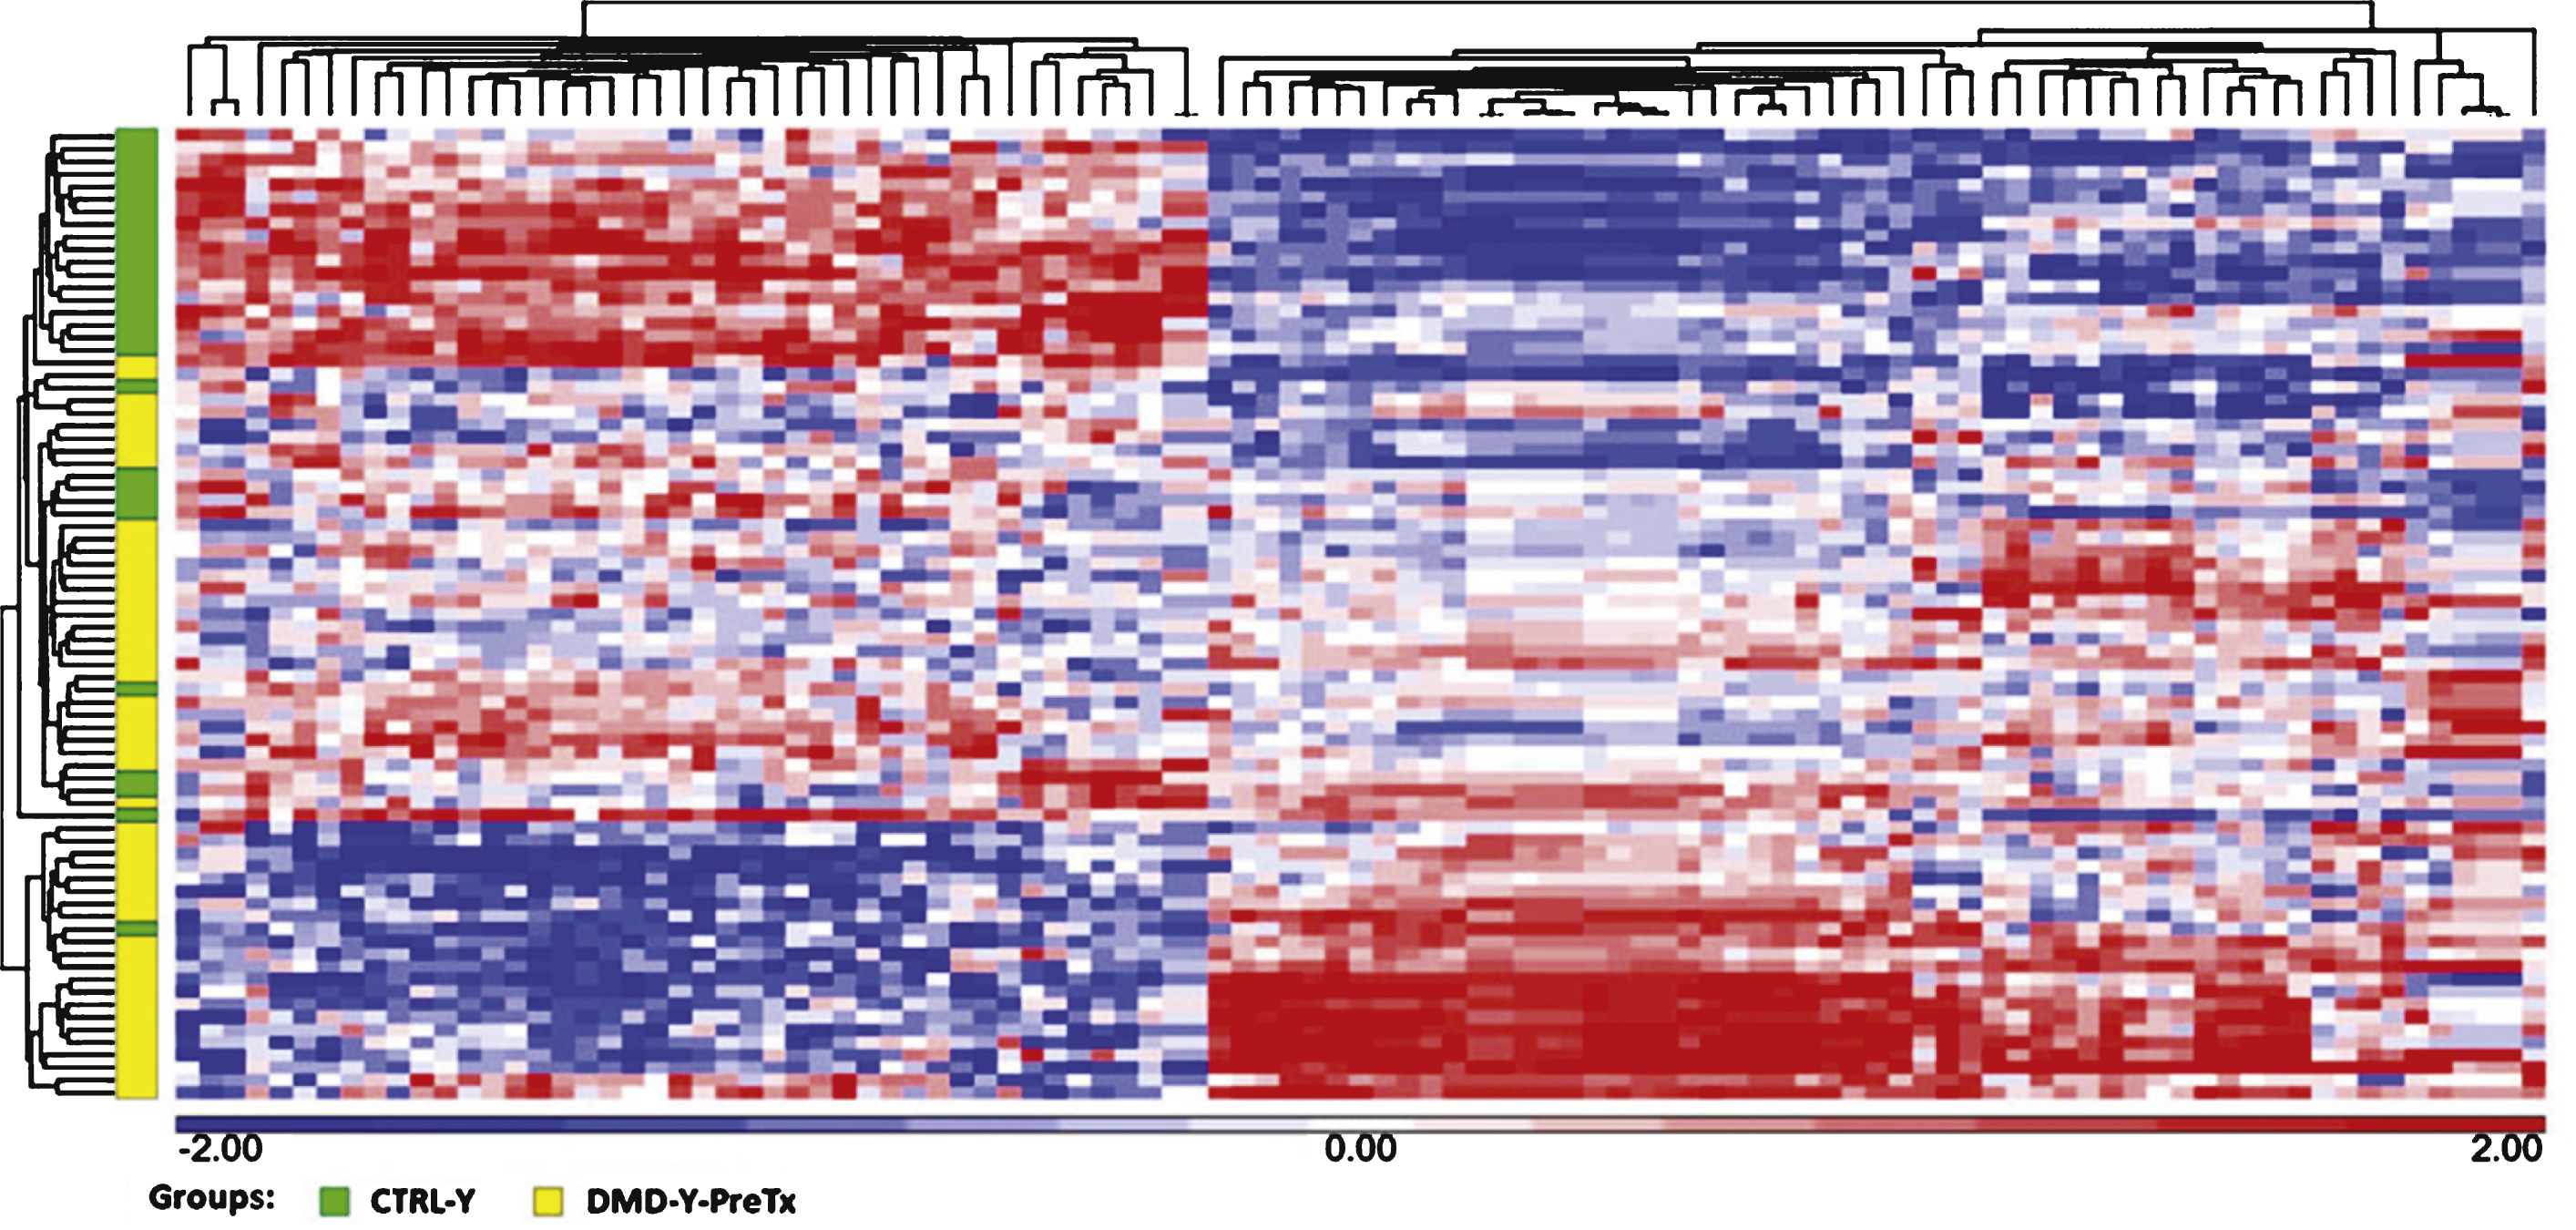 Hierarchical clustering of 101 mRNAs (FDR <0.05, fold change >  |1.2|) that were differentially expressed in the comparison of DMD-YpreTx (n = 49) and CTRL-Y (n = 28). Statistical differences were determined using unpaired t-test. Red = up-regulation; white = no change; blue = down-regulation.